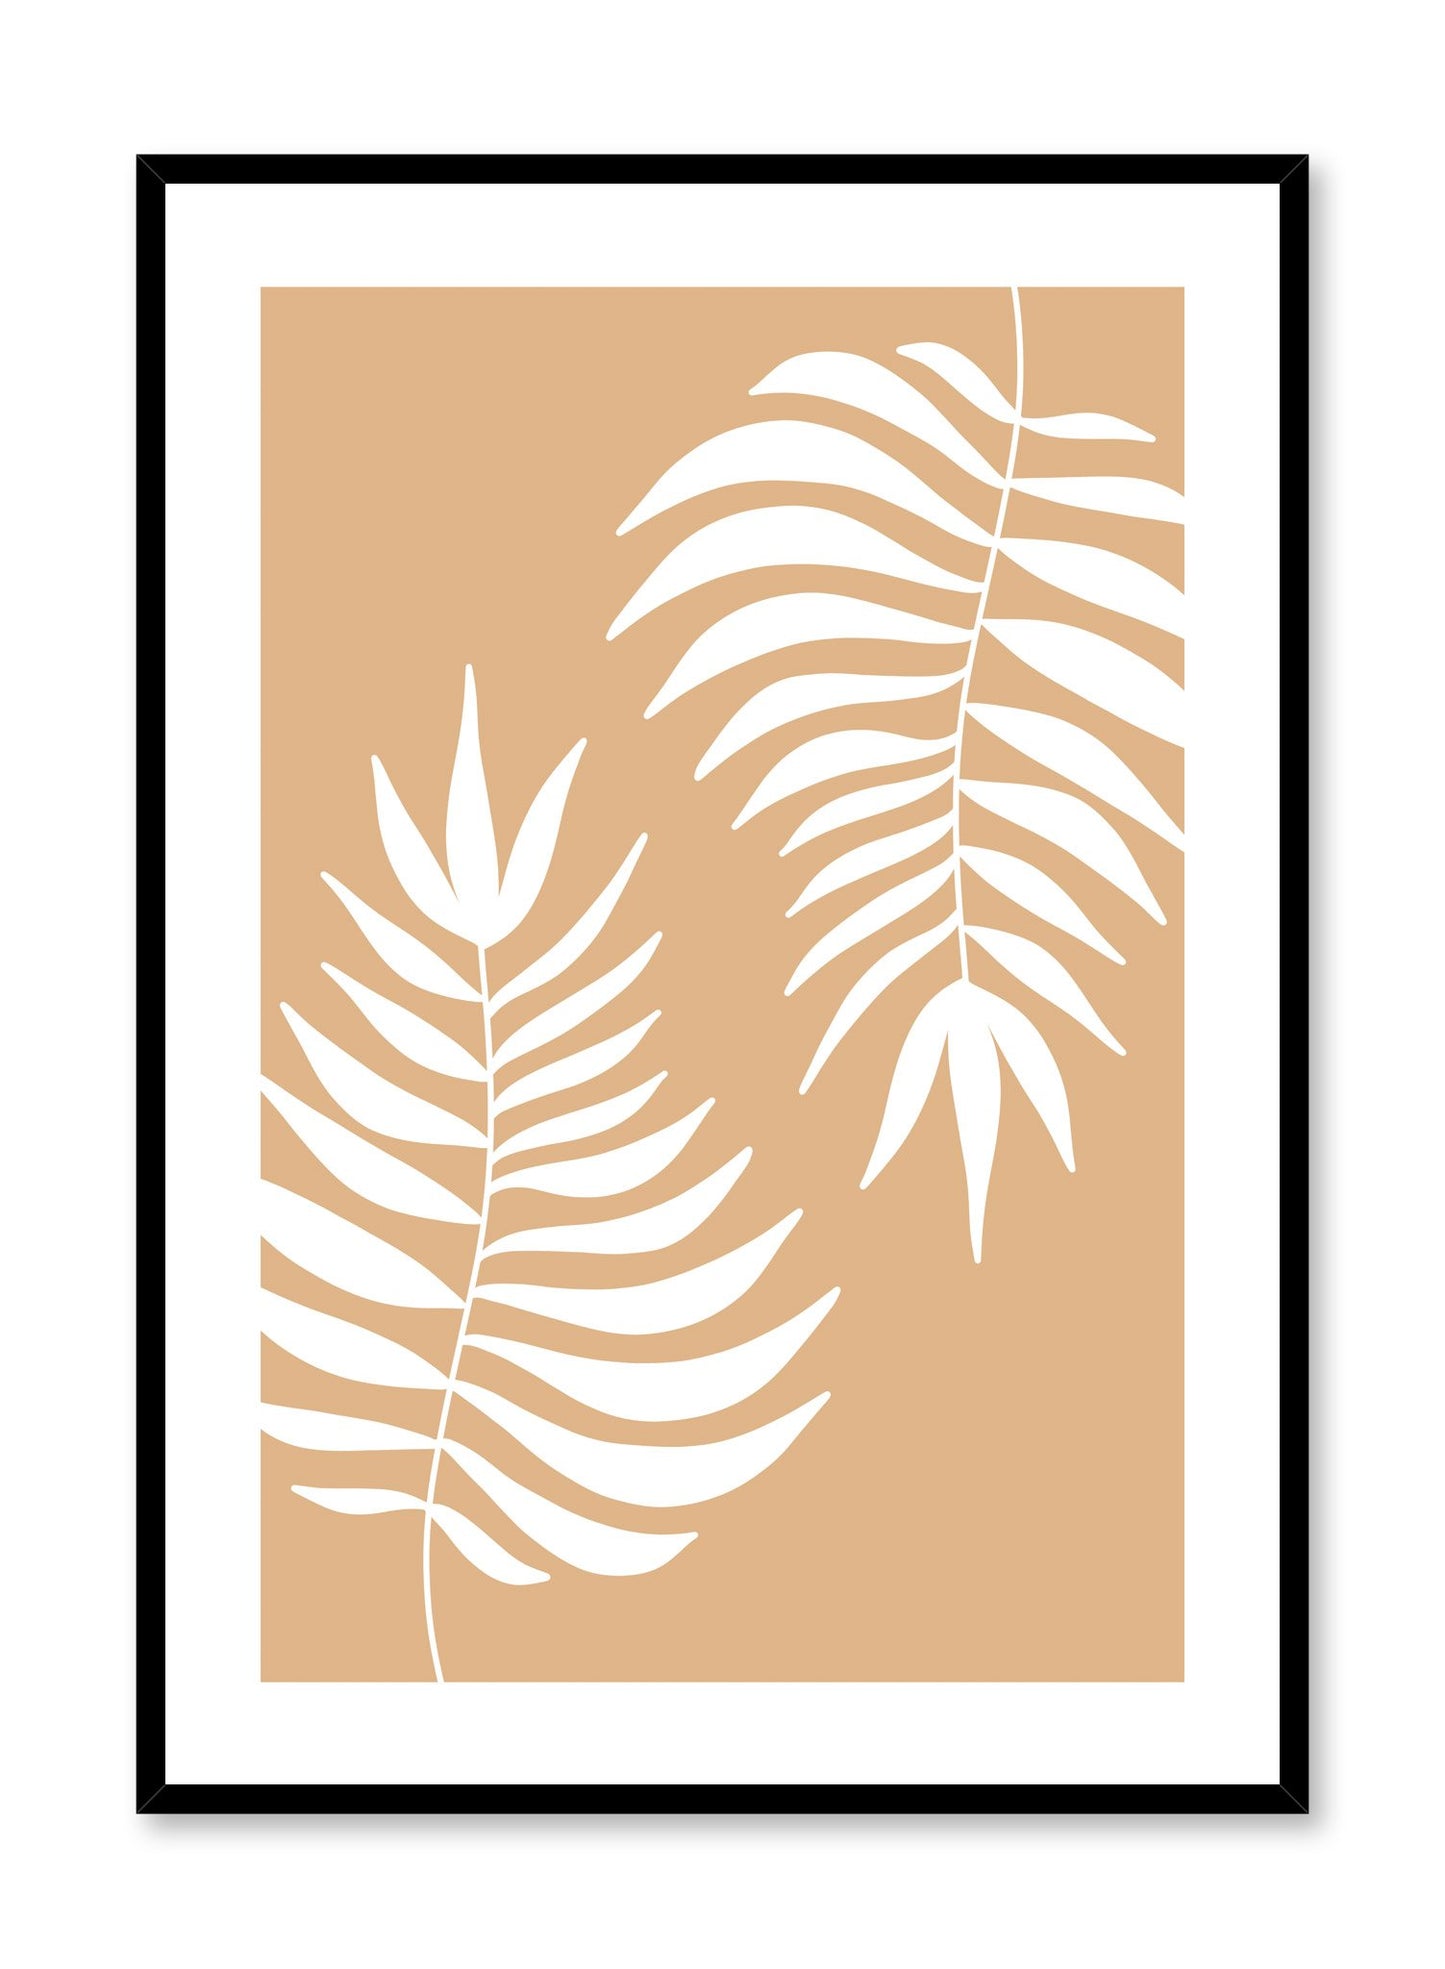 Modern minimalist illustration poster by Opposite Wall with leaves in beige